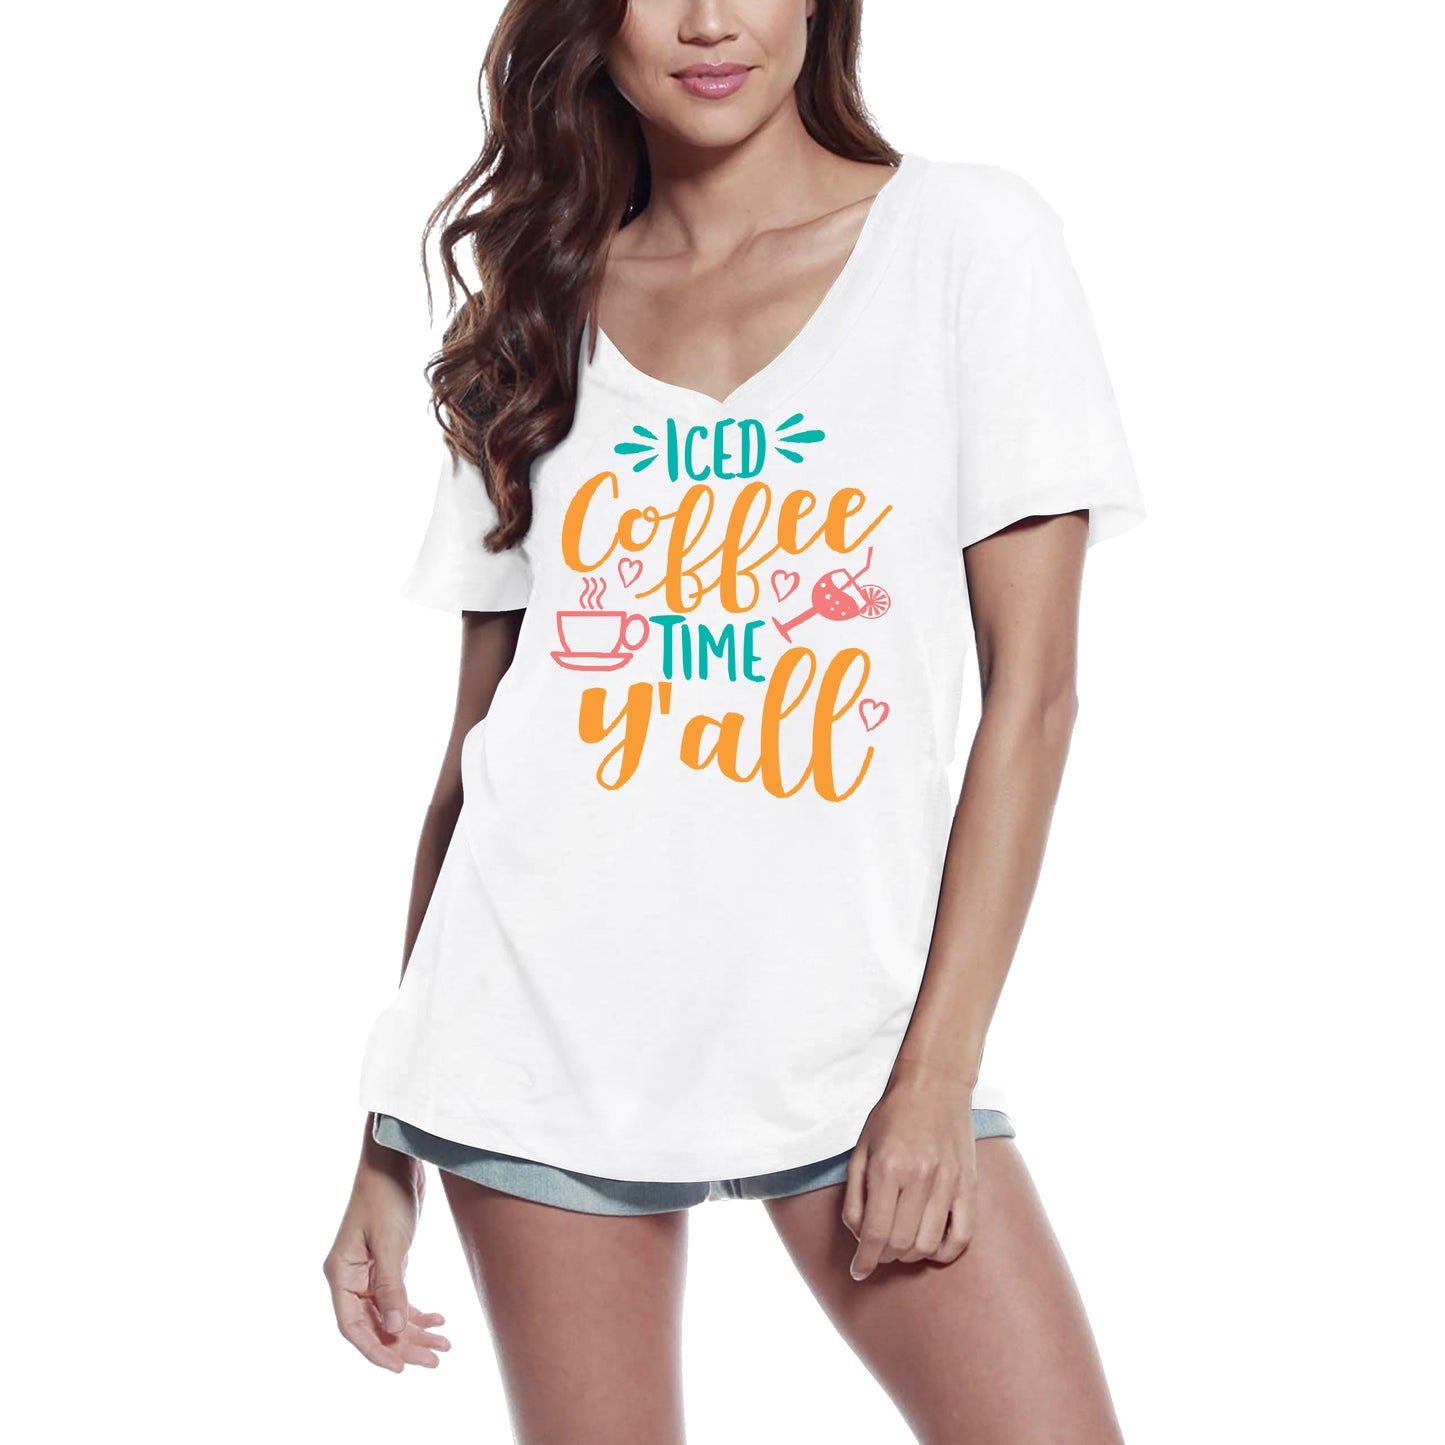 ULTRABASIC Women's T-Shirt Iced Coffee Time Y'all - Short Sleeve Tee Shirt Tops